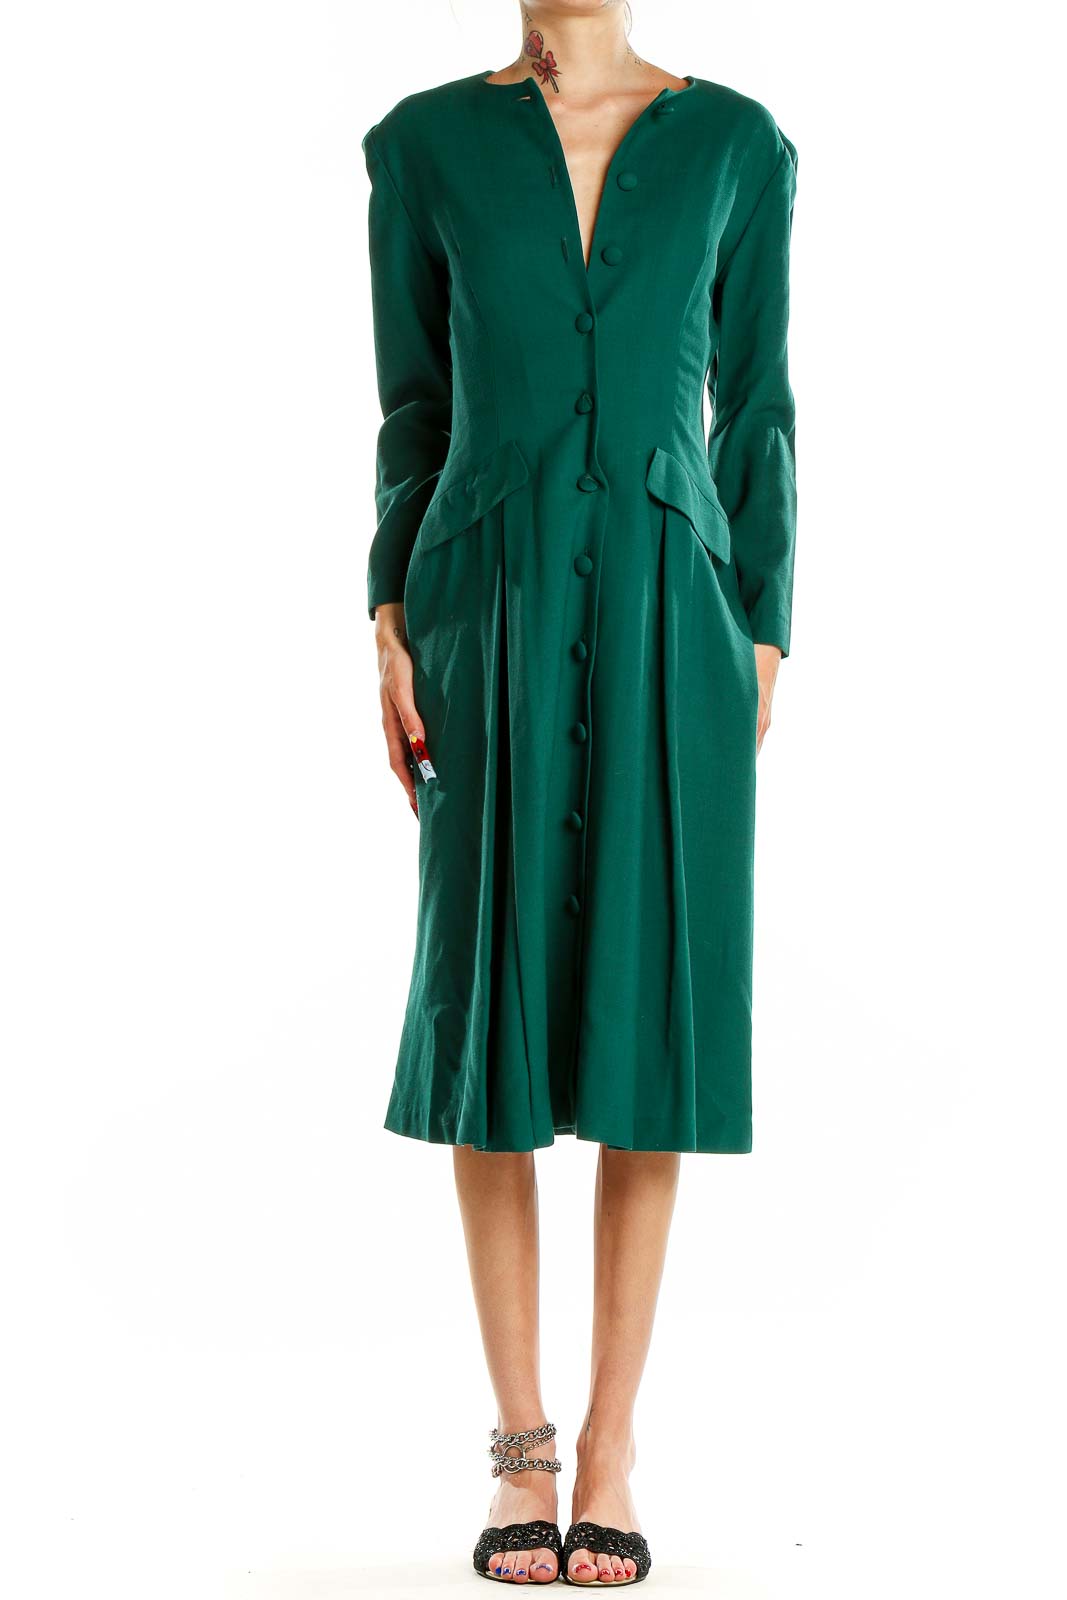 Green Vintage Classic Dress Front